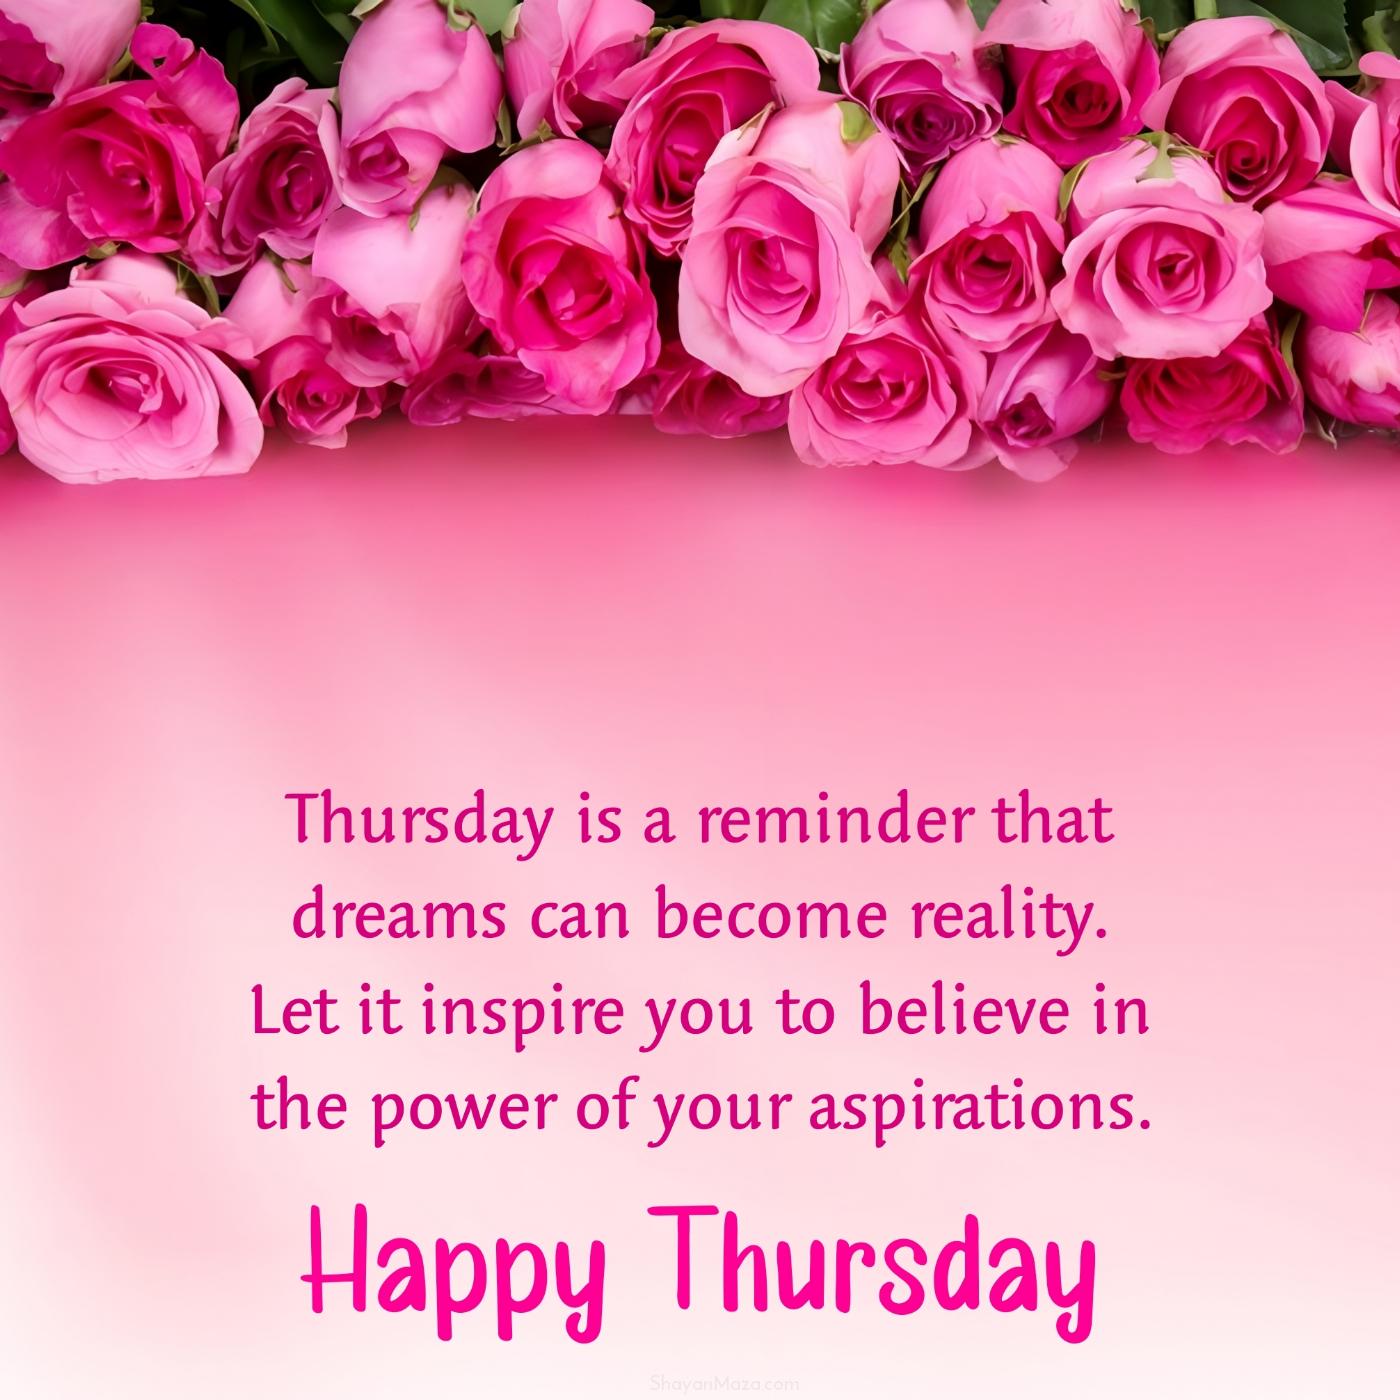 Thursday is a reminder that dreams can become reality